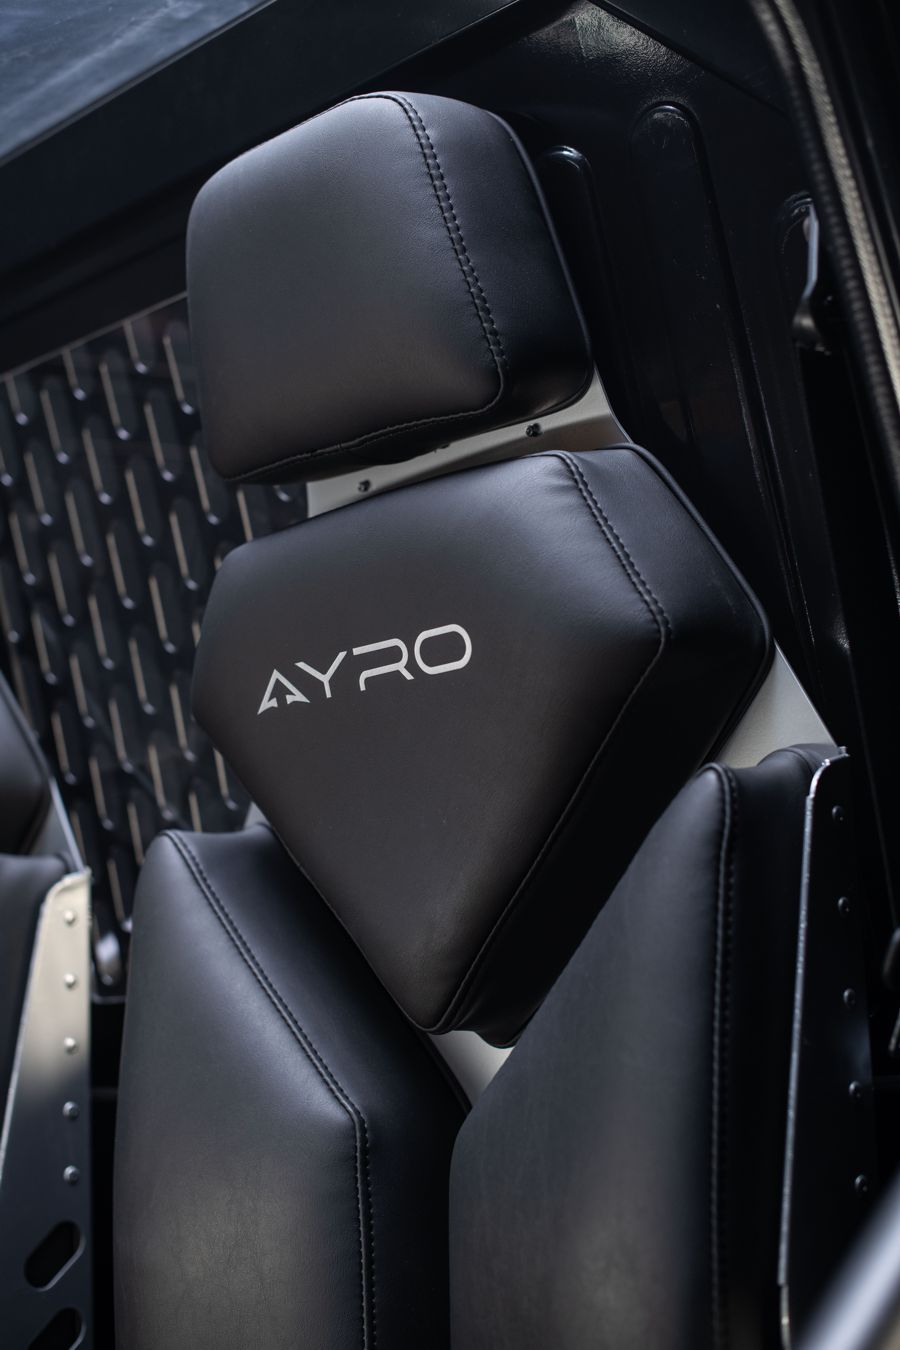 AYRO wins Patent for Vehicle Seat Design